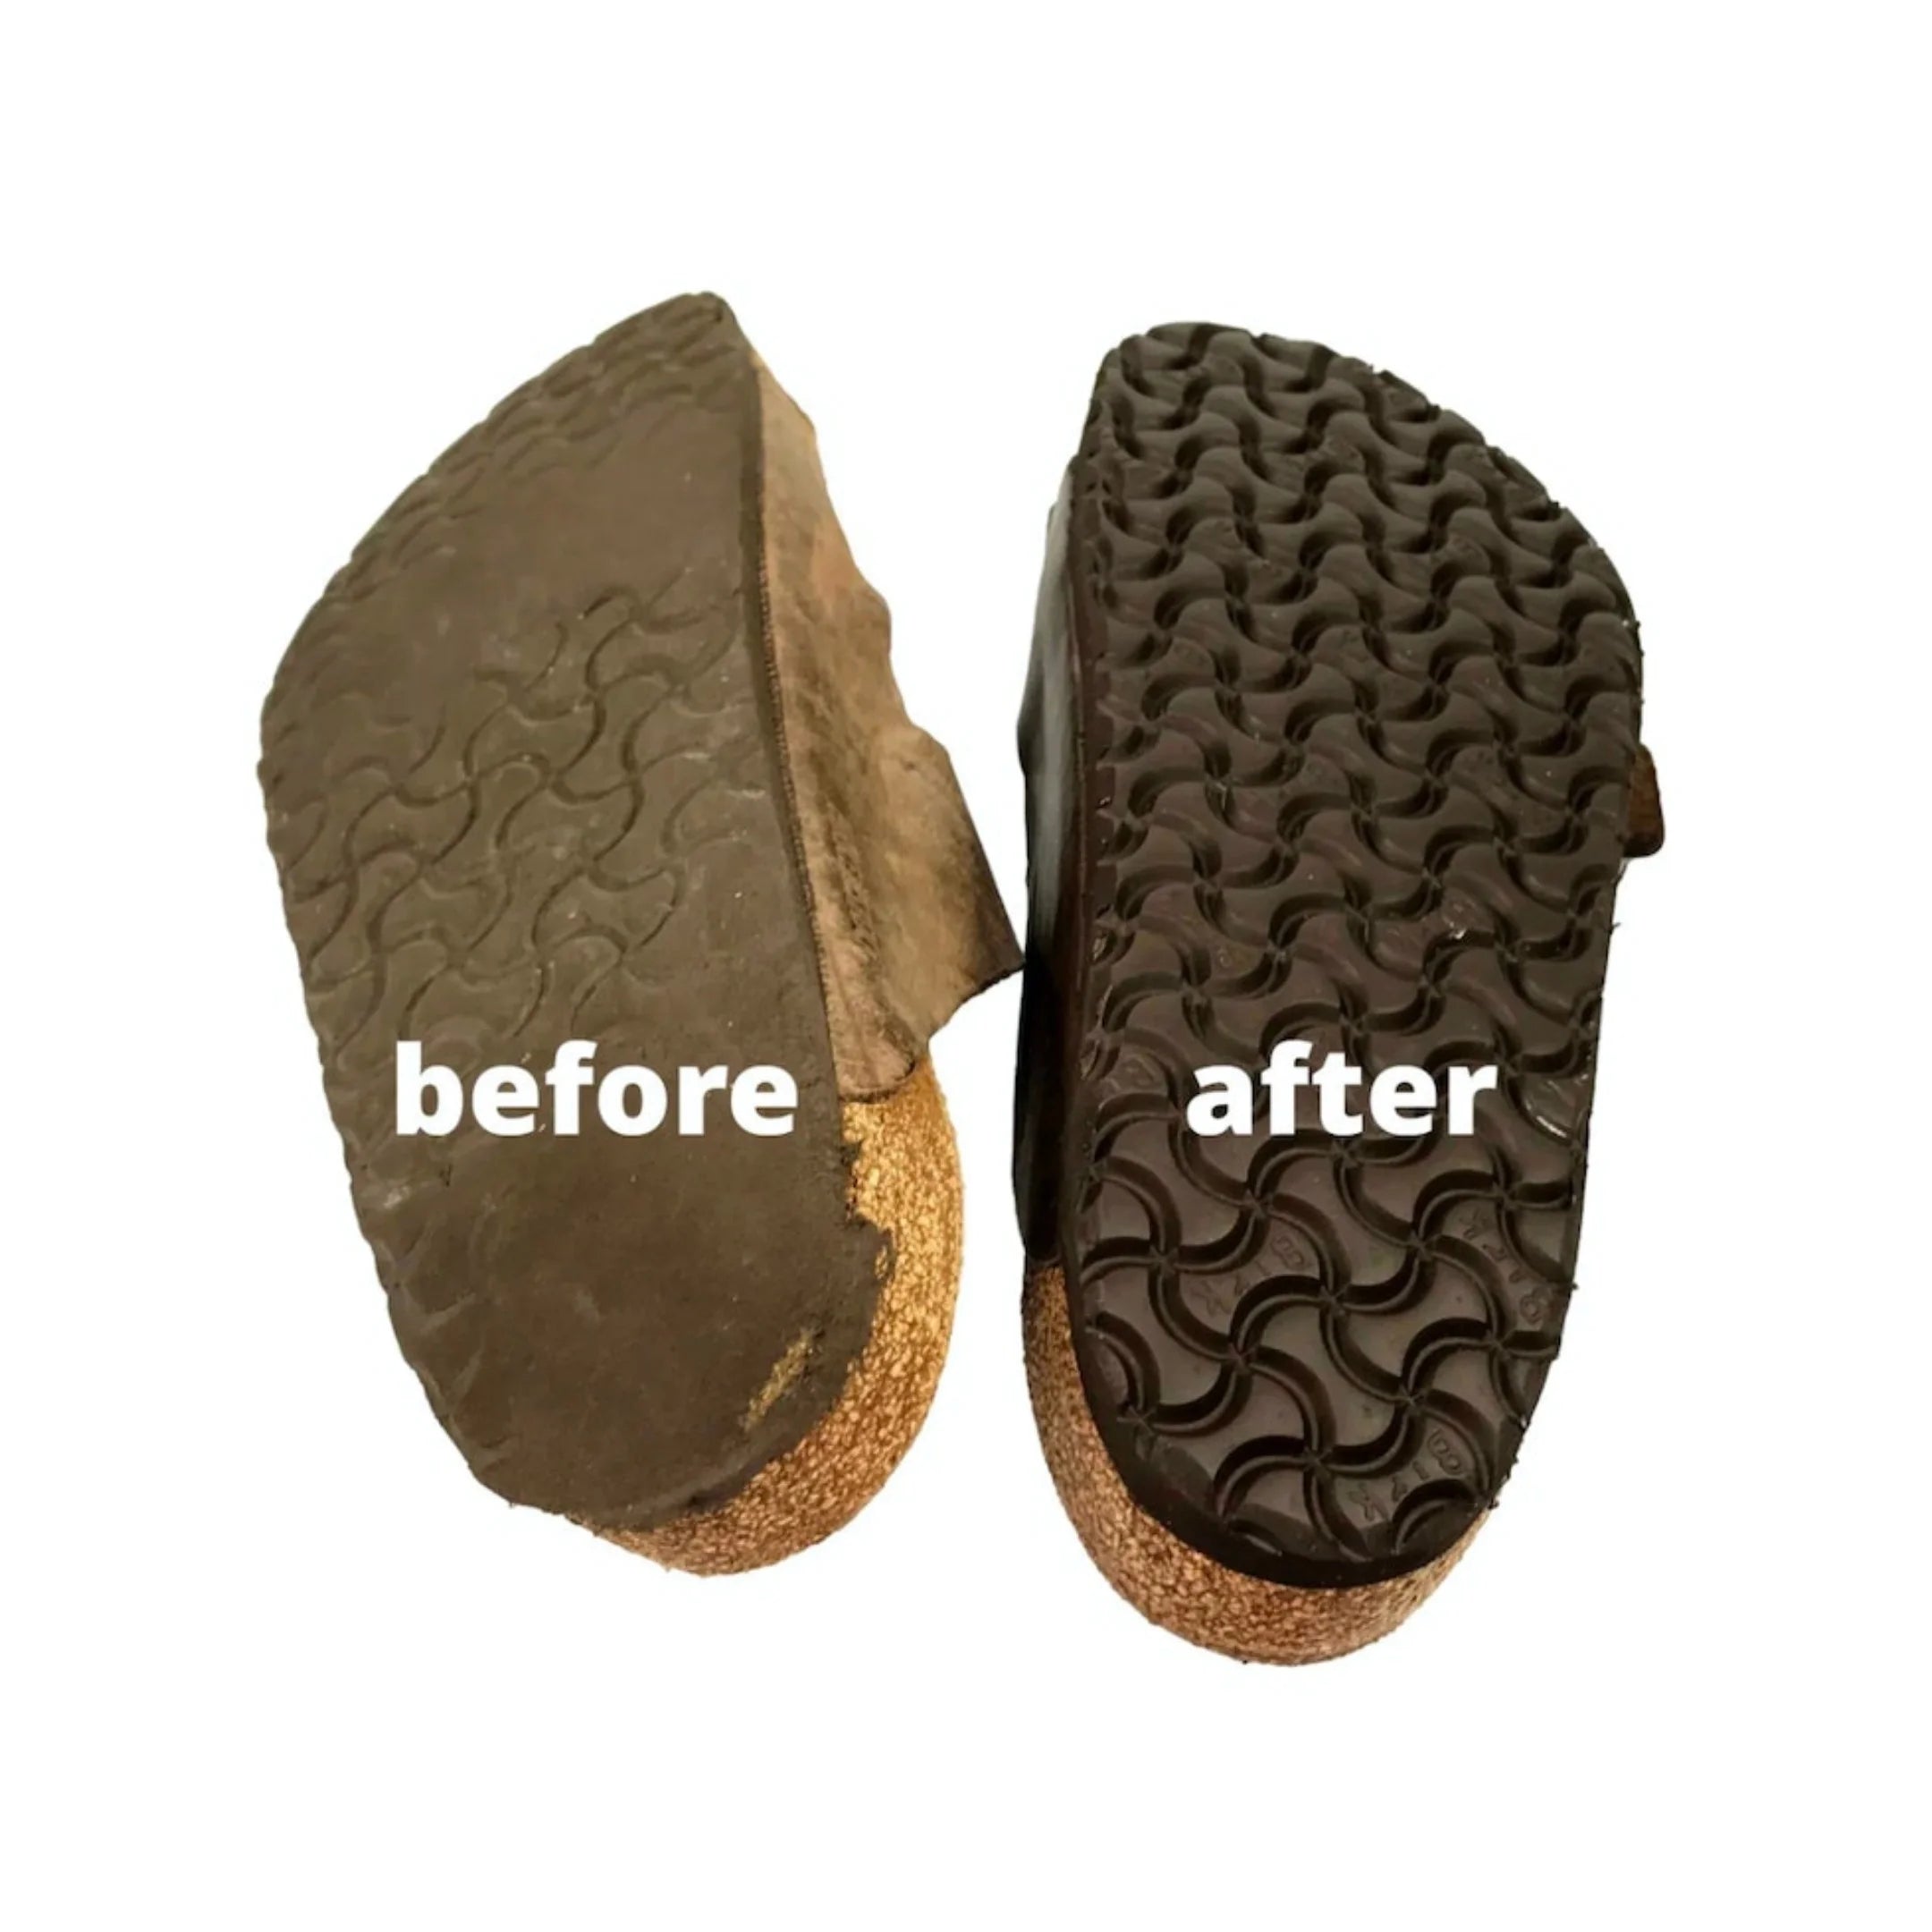 Birkenstocks-before-and-after-resole-showing-worn-out-soles-compared-to-new-refreshed-soles